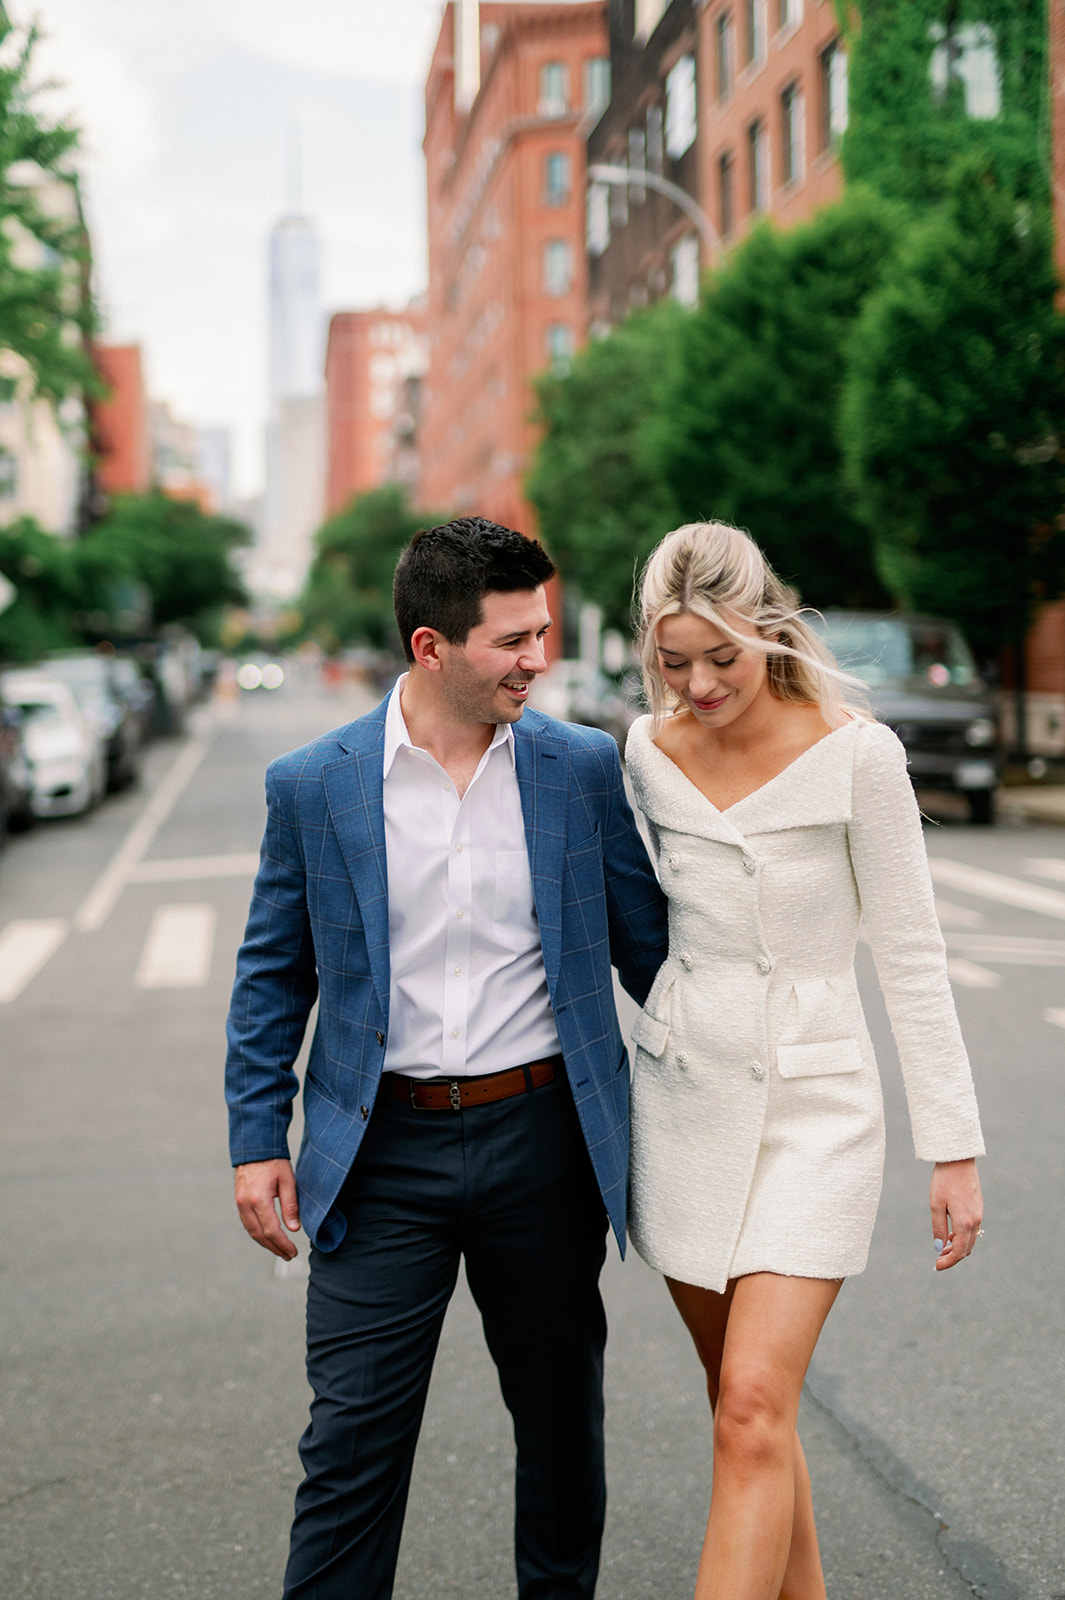 Romantic New York engagement session in West Village.